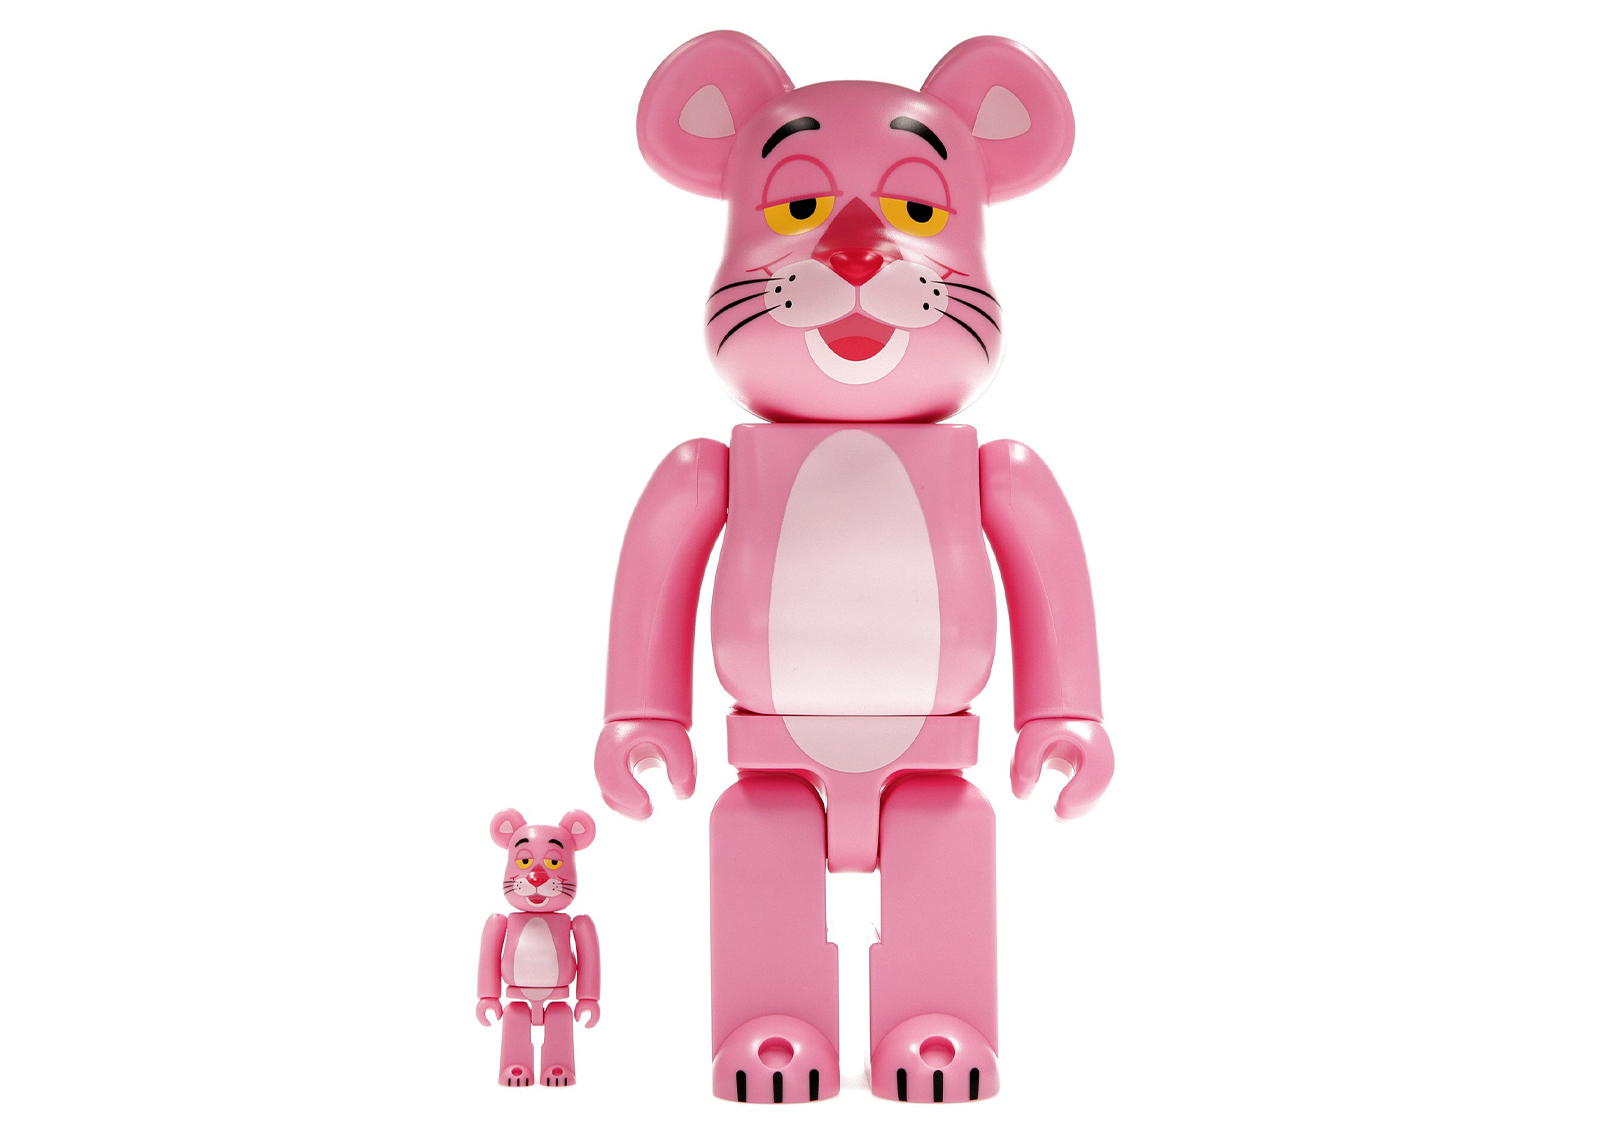 BE@RBRICK PINK PANTHER 100%&400%